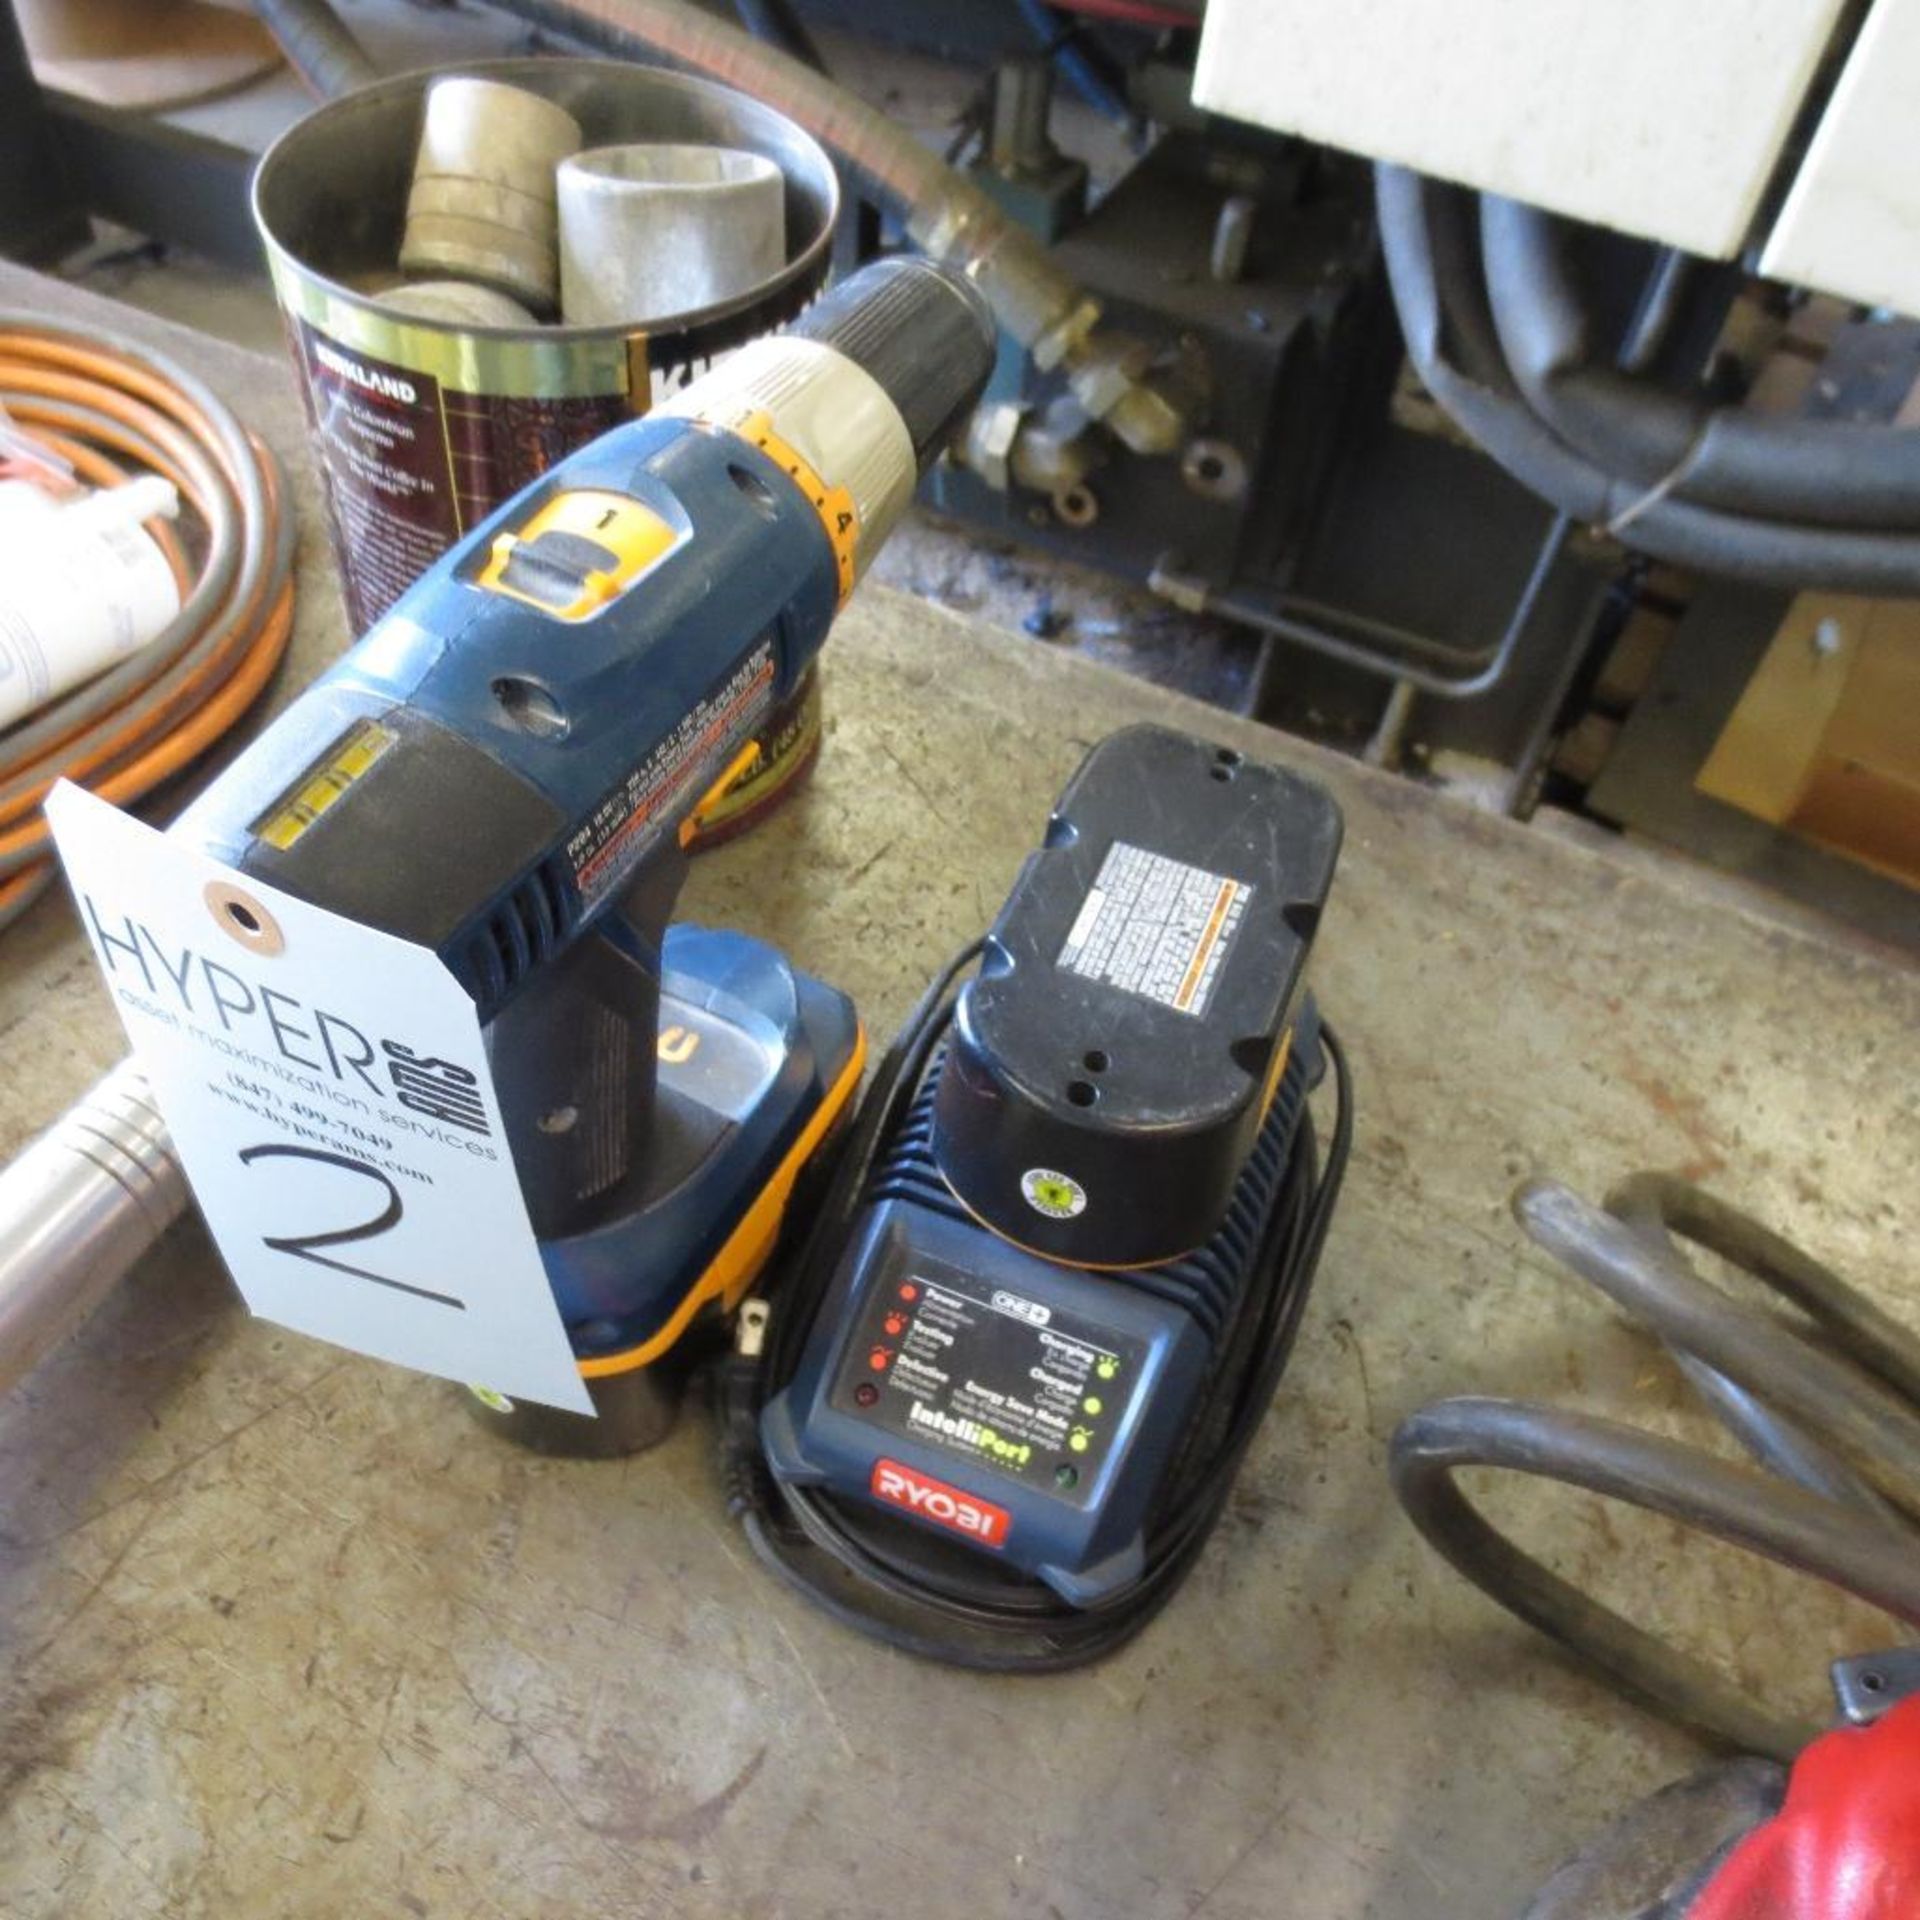 Ryobi 18V Drill With Charger, LOCATED AT 1850 Howard Street, Unit A Elk Grove Village, IL